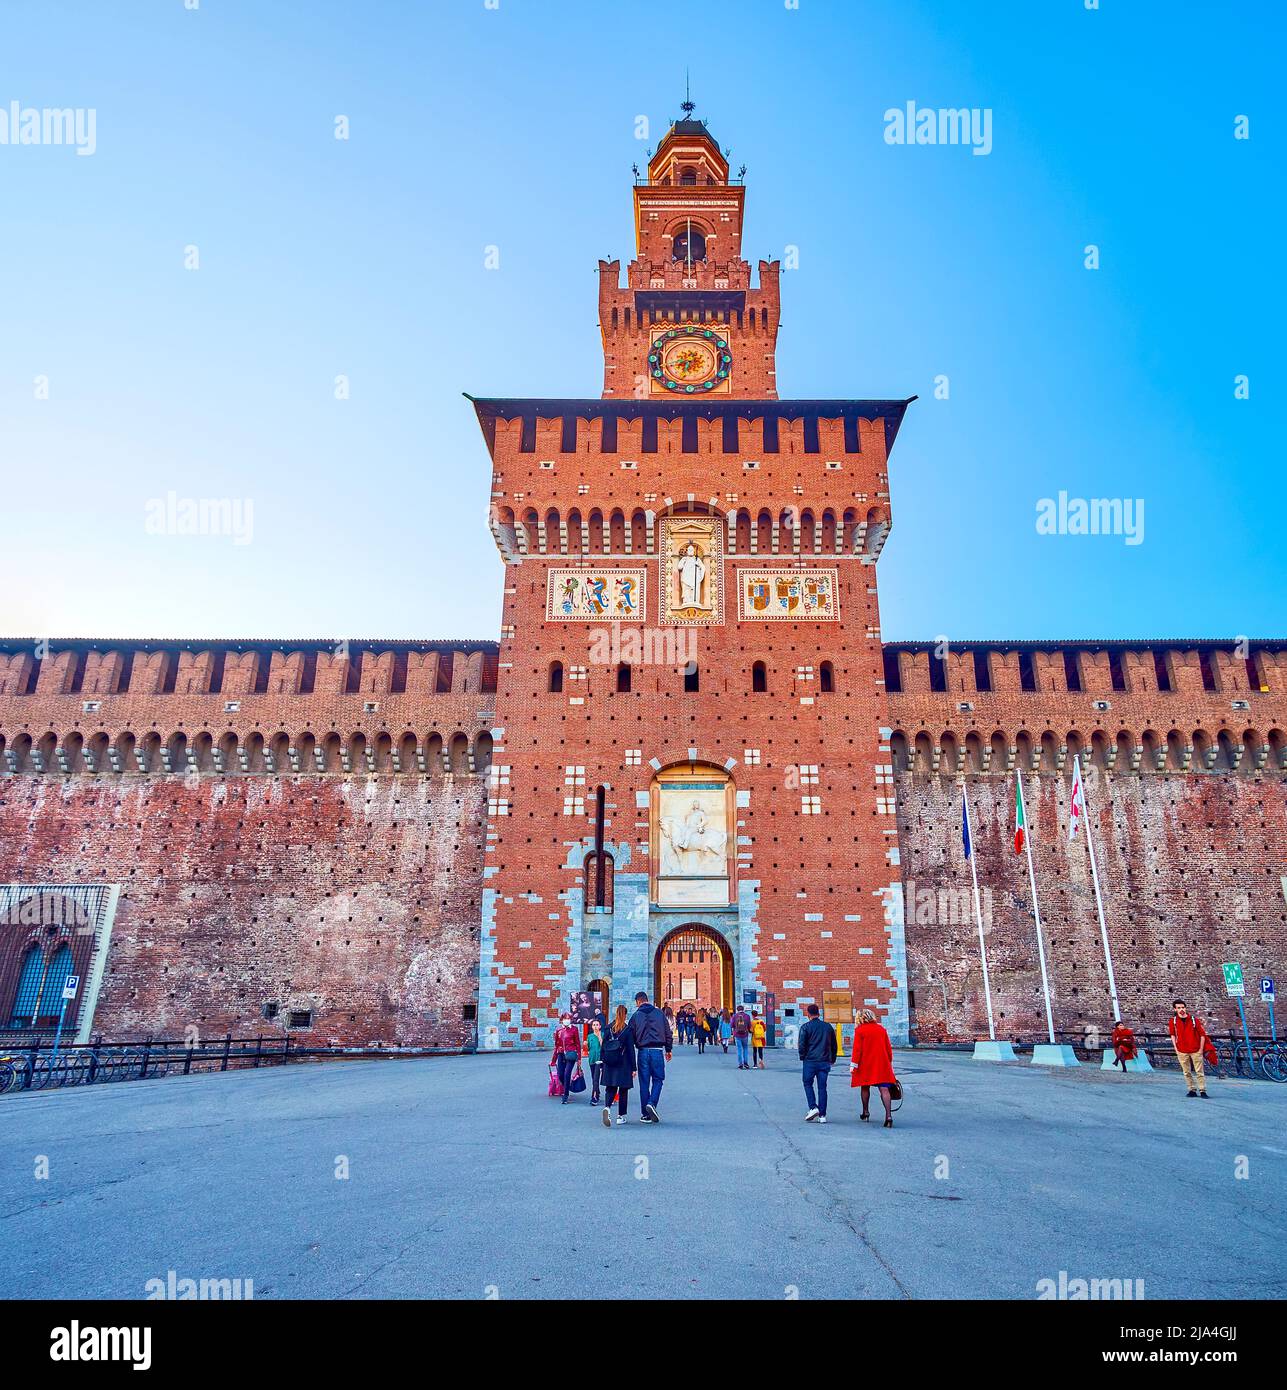 MILAN, ITALY - APRIL 5, 2022: Sforza's Castle is the best preserved medieval object in Milan and the most visited historical landmark, on April 5 in M Stock Photo